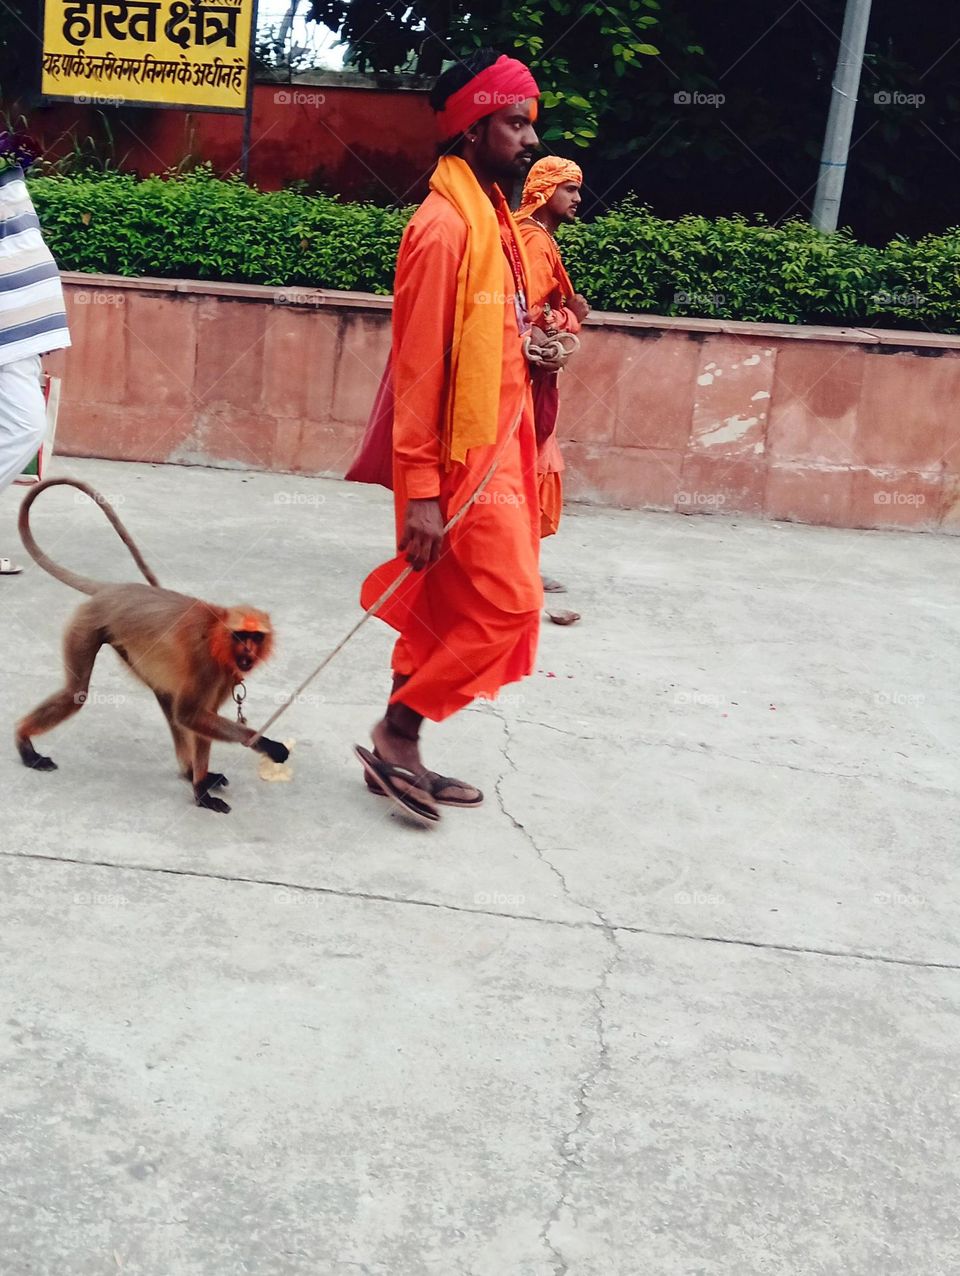 A saint passing with his langoor monkey in Hindu attires.